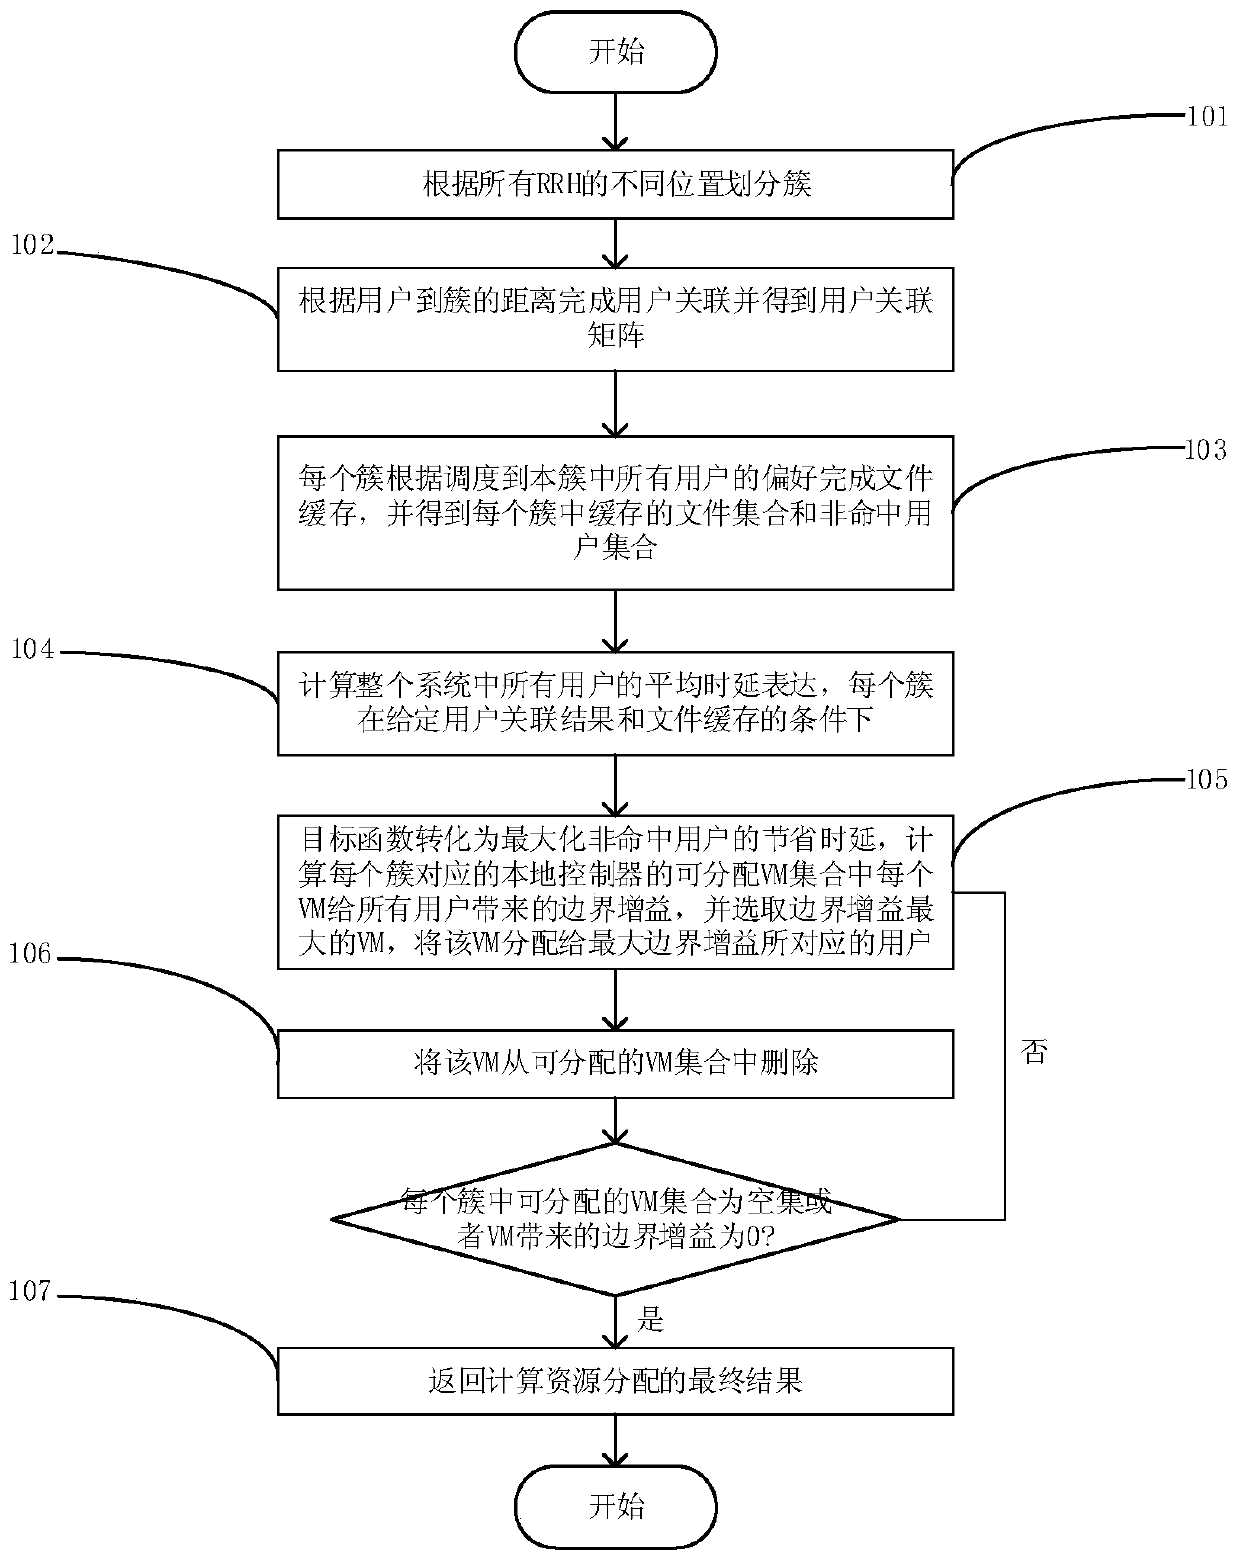 C-RAN user association and computing resource allocation method based on deep reinforcement learning